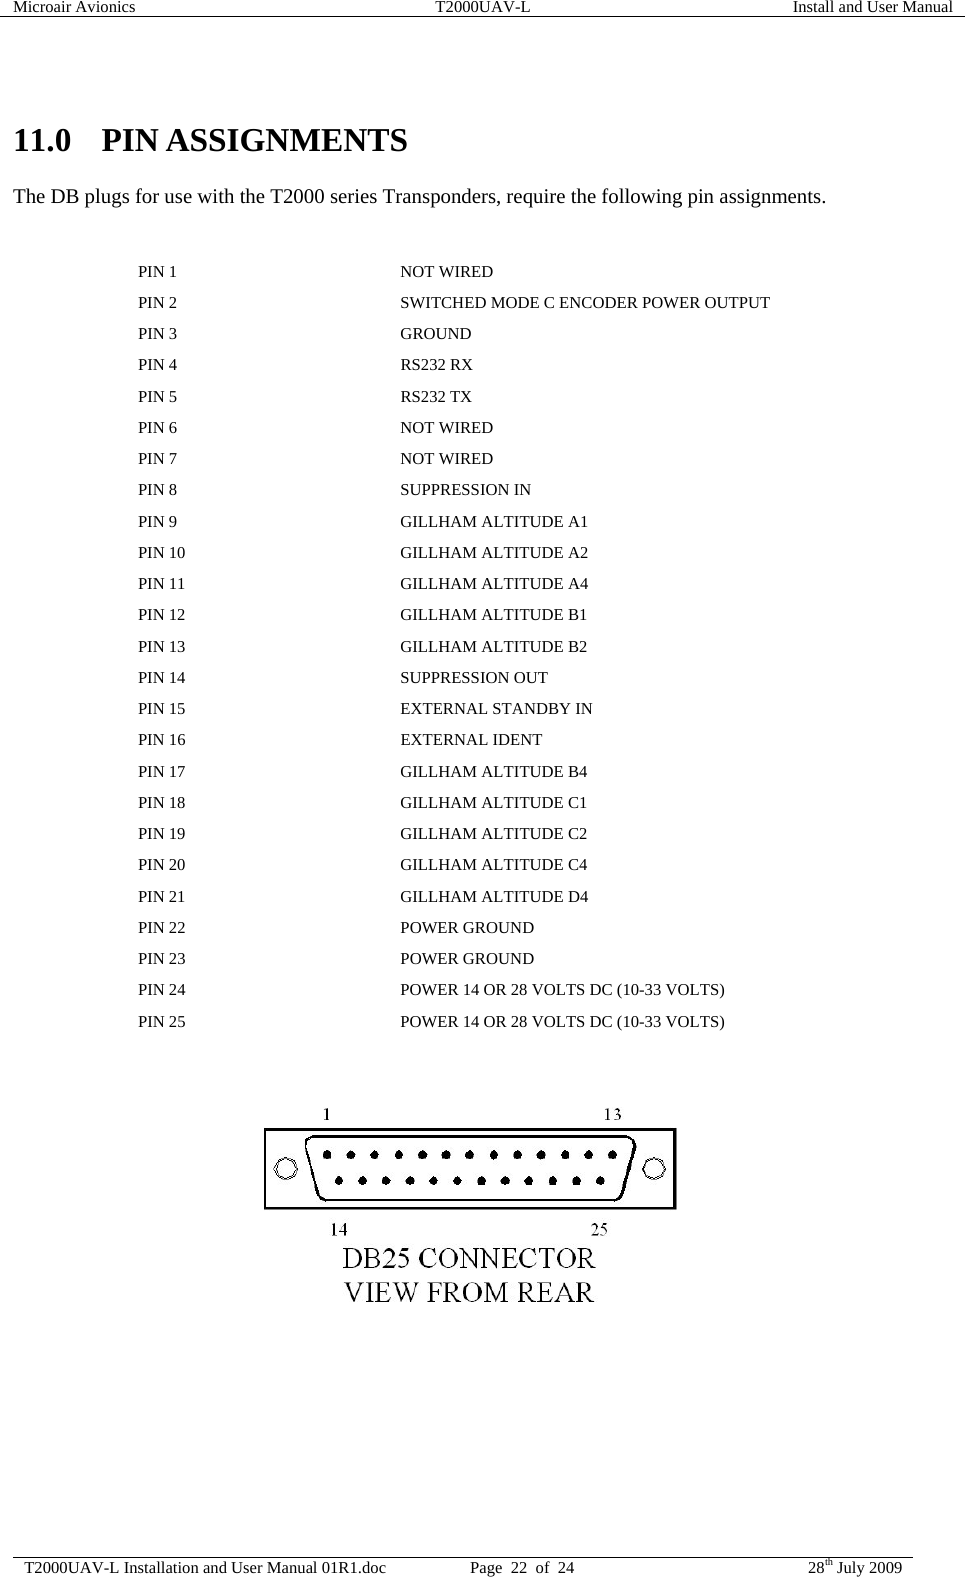 Microair Avionics  T2000UAV-L  Install and User Manual  T2000UAV-L Installation and User Manual 01R1.doc  Page  22  of  24  28th July 2009   11.0 PIN ASSIGNMENTS The DB plugs for use with the T2000 series Transponders, require the following pin assignments.   PIN 1  NOT WIRED PIN 2  SWITCHED MODE C ENCODER POWER OUTPUT PIN 3  GROUND PIN 4  RS232 RX PIN 5  RS232 TX PIN 6  NOT WIRED PIN 7  NOT WIRED PIN 8  SUPPRESSION IN PIN 9  GILLHAM ALTITUDE A1 PIN 10  GILLHAM ALTITUDE A2 PIN 11  GILLHAM ALTITUDE A4 PIN 12  GILLHAM ALTITUDE B1 PIN 13  GILLHAM ALTITUDE B2 PIN 14  SUPPRESSION OUT PIN 15  EXTERNAL STANDBY IN PIN 16  EXTERNAL IDENT PIN 17  GILLHAM ALTITUDE B4 PIN 18  GILLHAM ALTITUDE C1 PIN 19  GILLHAM ALTITUDE C2 PIN 20  GILLHAM ALTITUDE C4 PIN 21  GILLHAM ALTITUDE D4 PIN 22  POWER GROUND PIN 23  POWER GROUND PIN 24  POWER 14 OR 28 VOLTS DC (10-33 VOLTS) PIN 25  POWER 14 OR 28 VOLTS DC (10-33 VOLTS)    